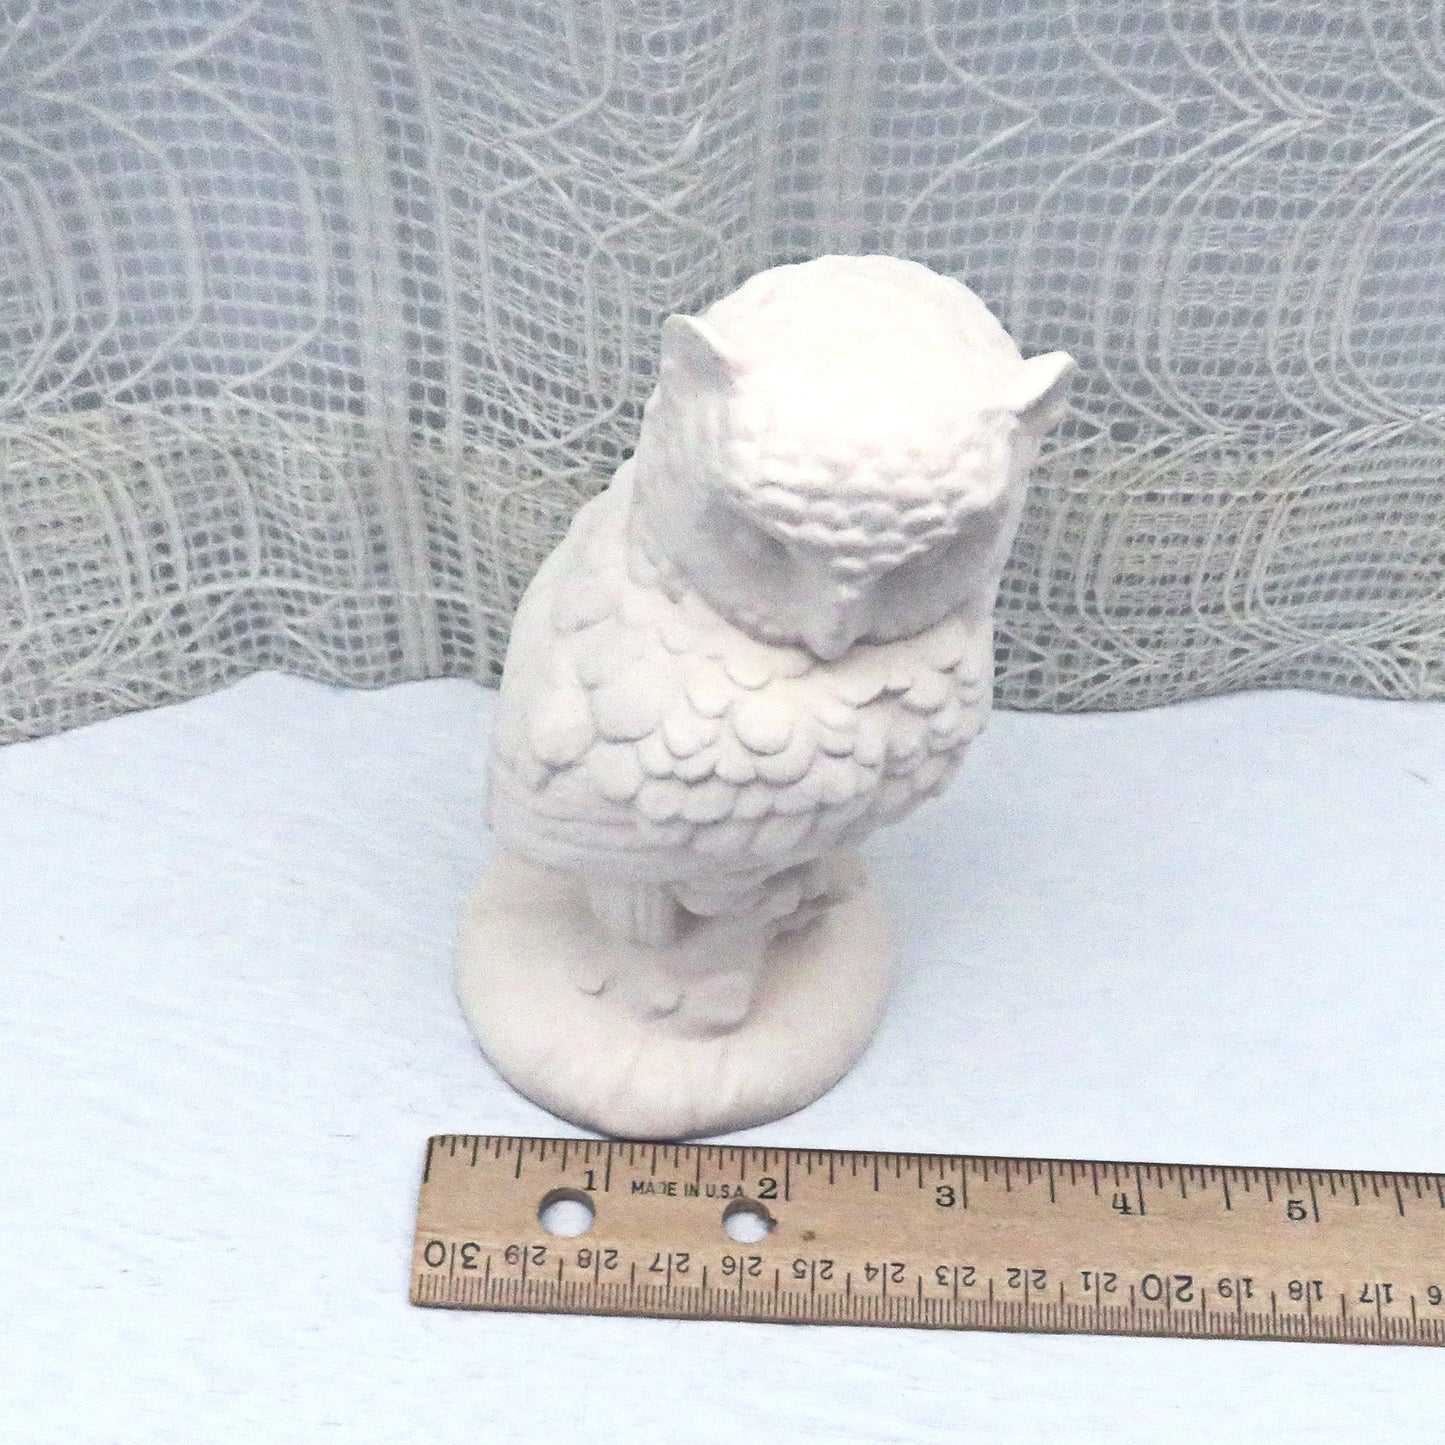 Unpainted Ceramic Bisque Owl Figurine, Ceramics to Paint, Ready to Paint Owl Statue, Owl Decor, Owl Gift